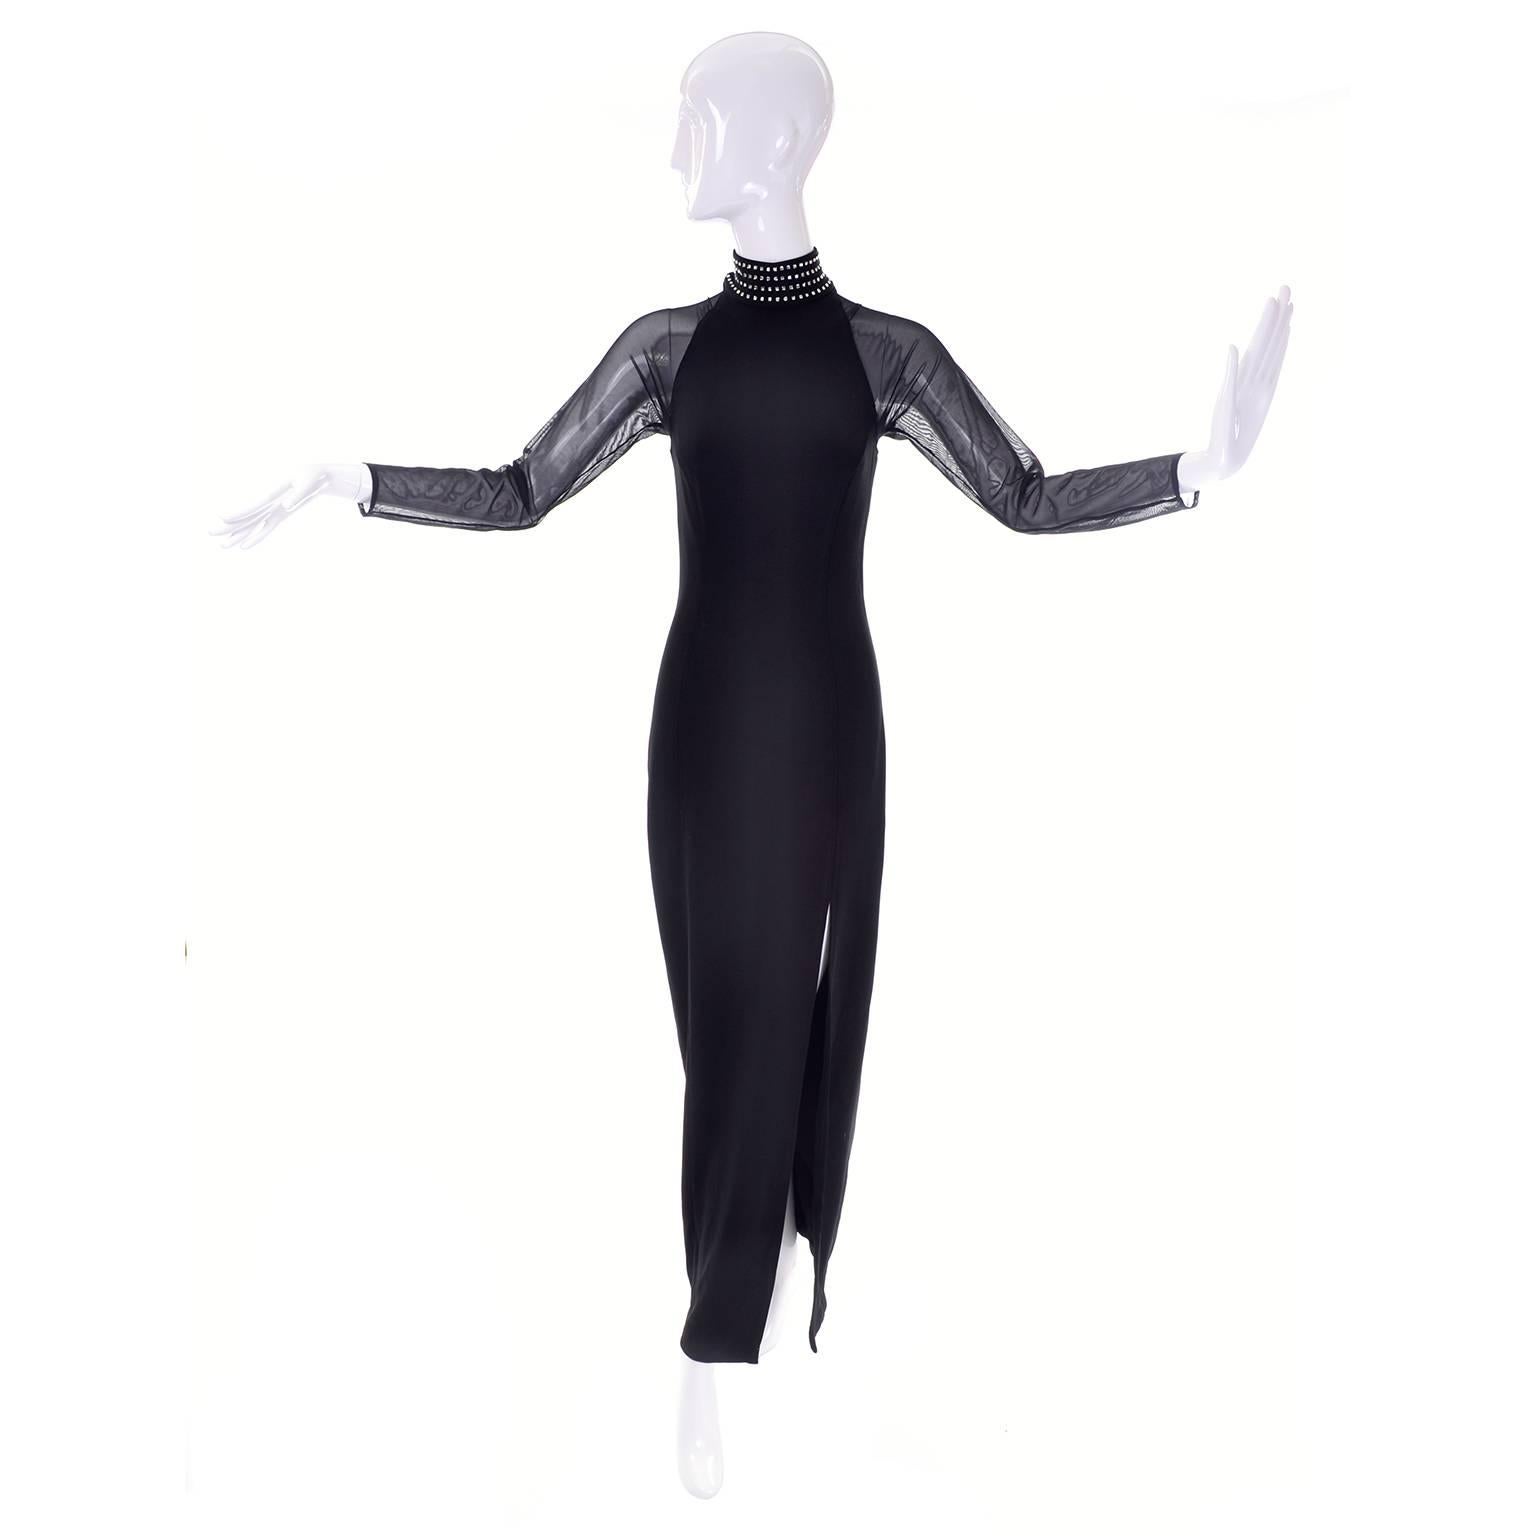 This black vintage Tadashi Lycra maxi dress has sheer long raglan sleeves and a dramatic studded high neck. The dress is from the late 1980's or early 1990's. There are square rhinestones that run around the mock turtleneck. This dress was made with